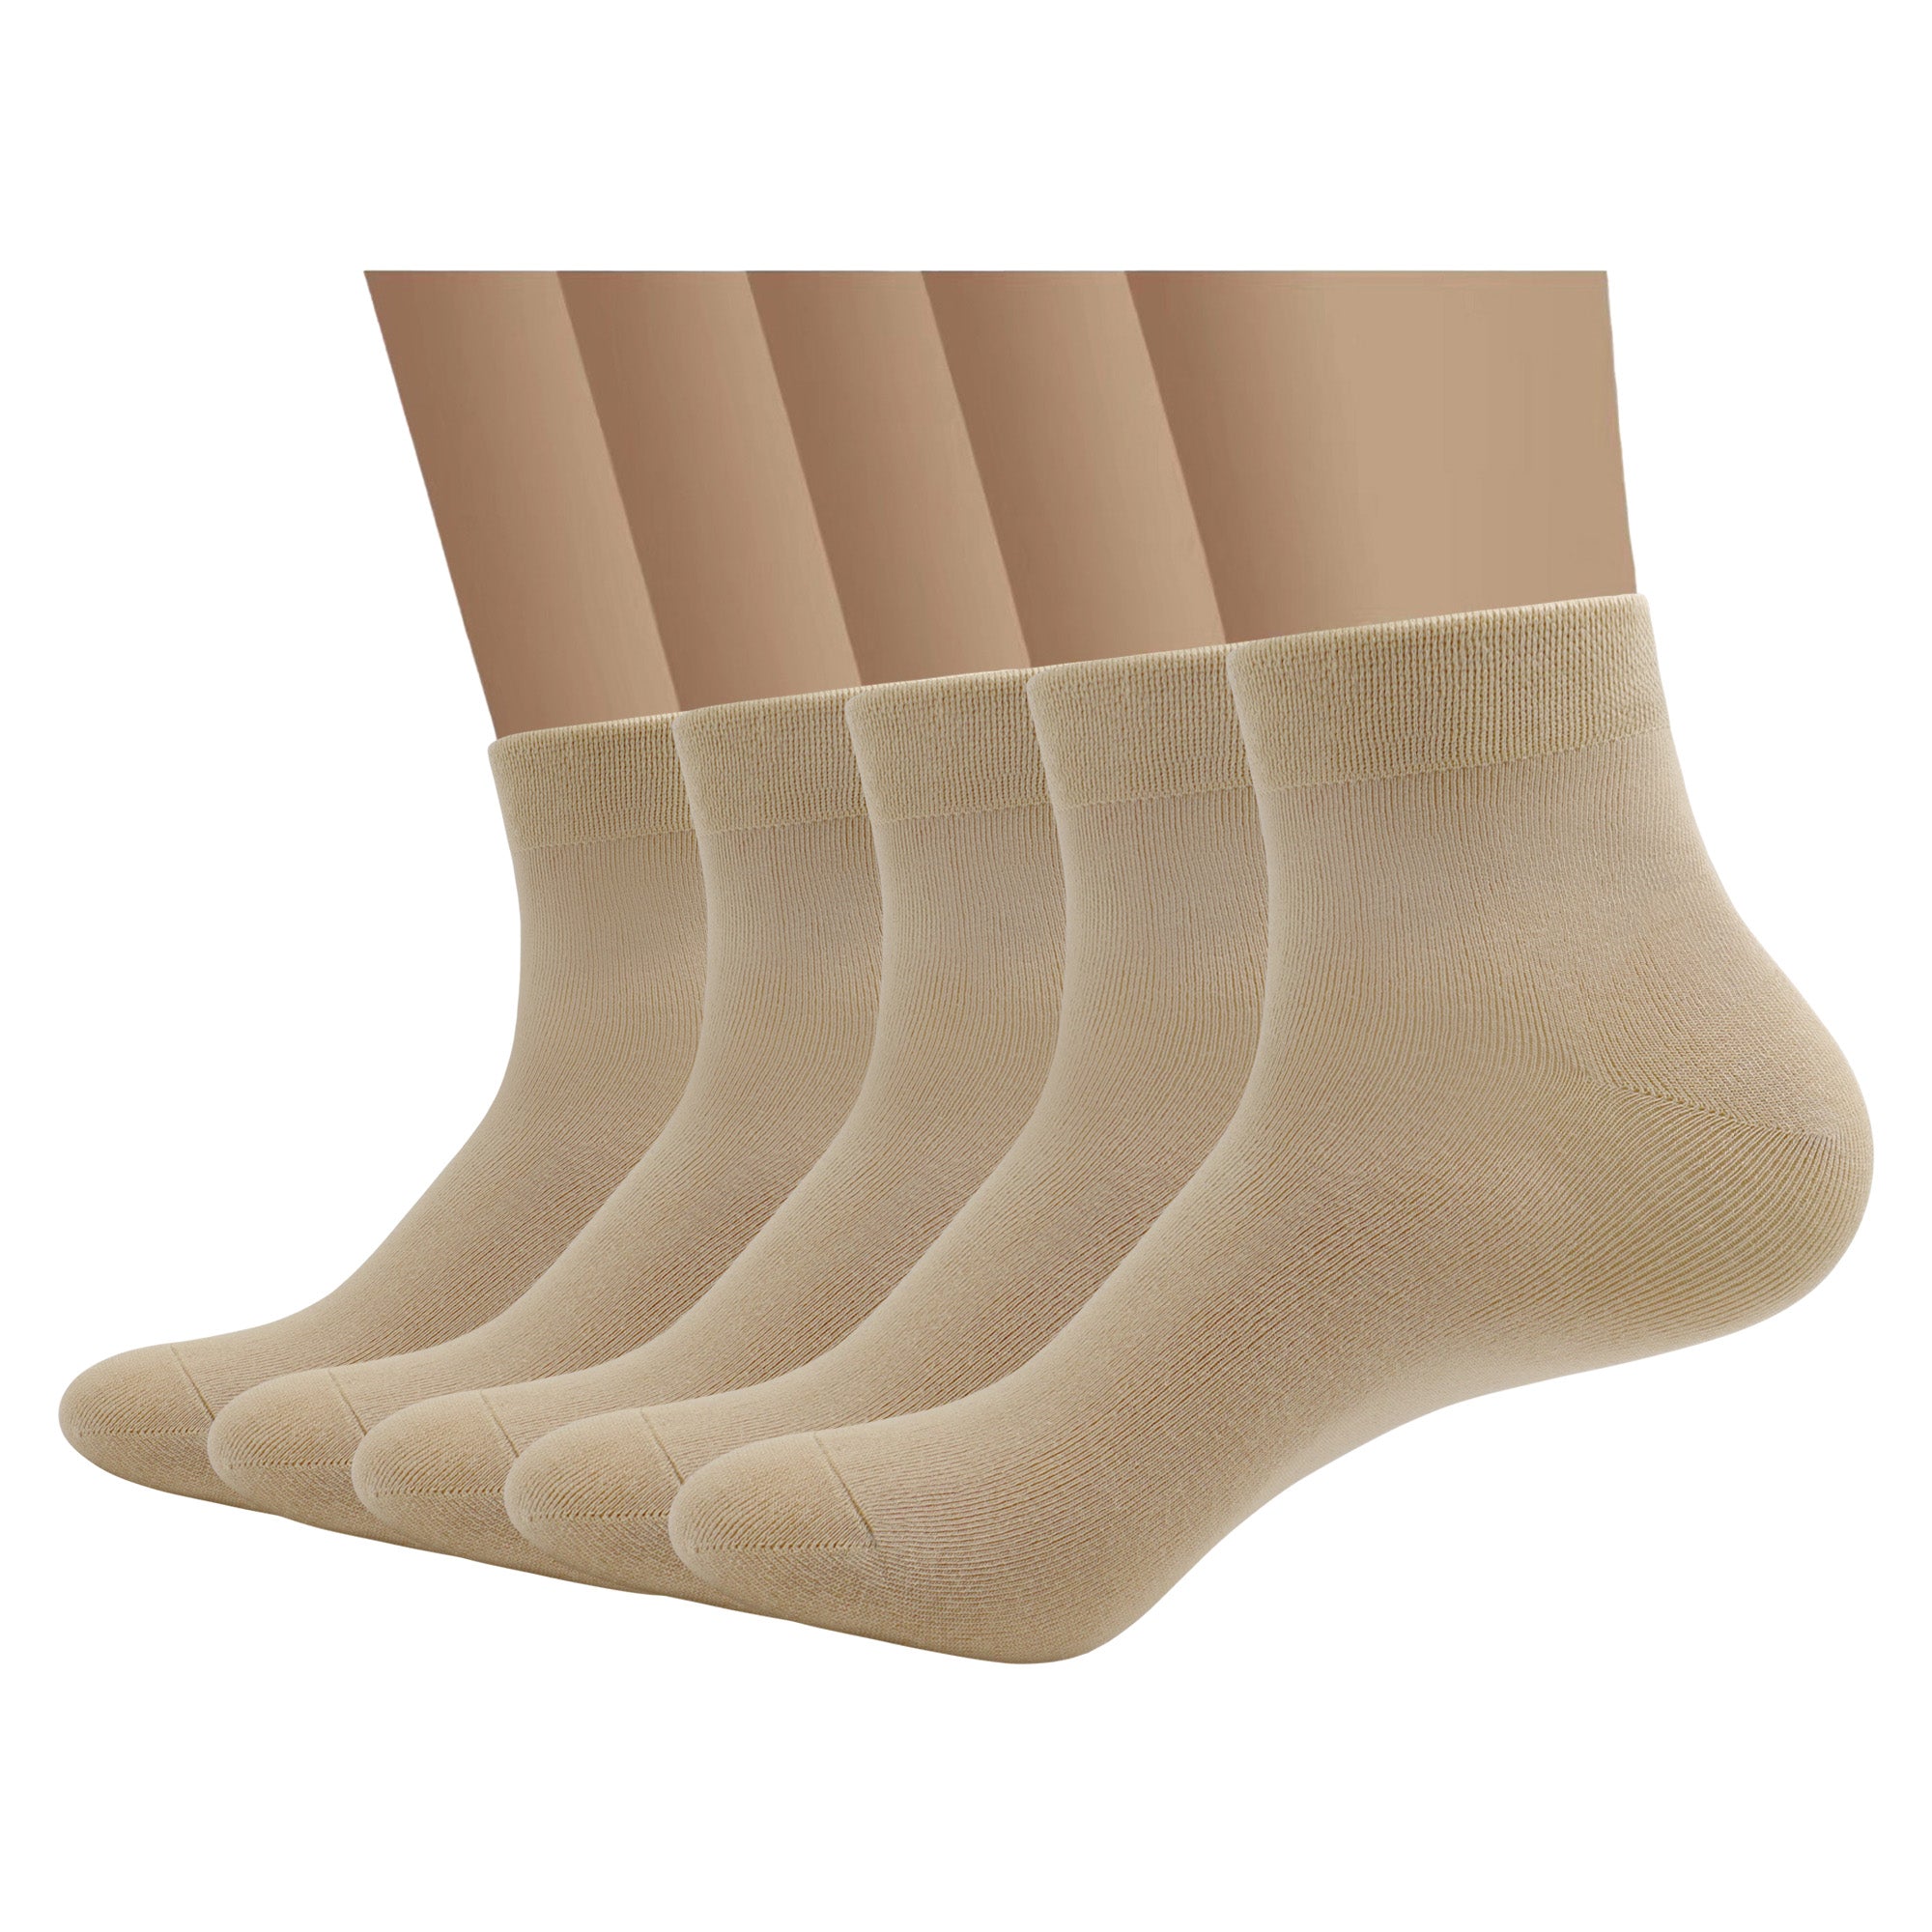 Bamboo Men sock Breathable Sock Low Quarter Thin Ankle Sock Comfort Cool soft Sock 5 Pairs